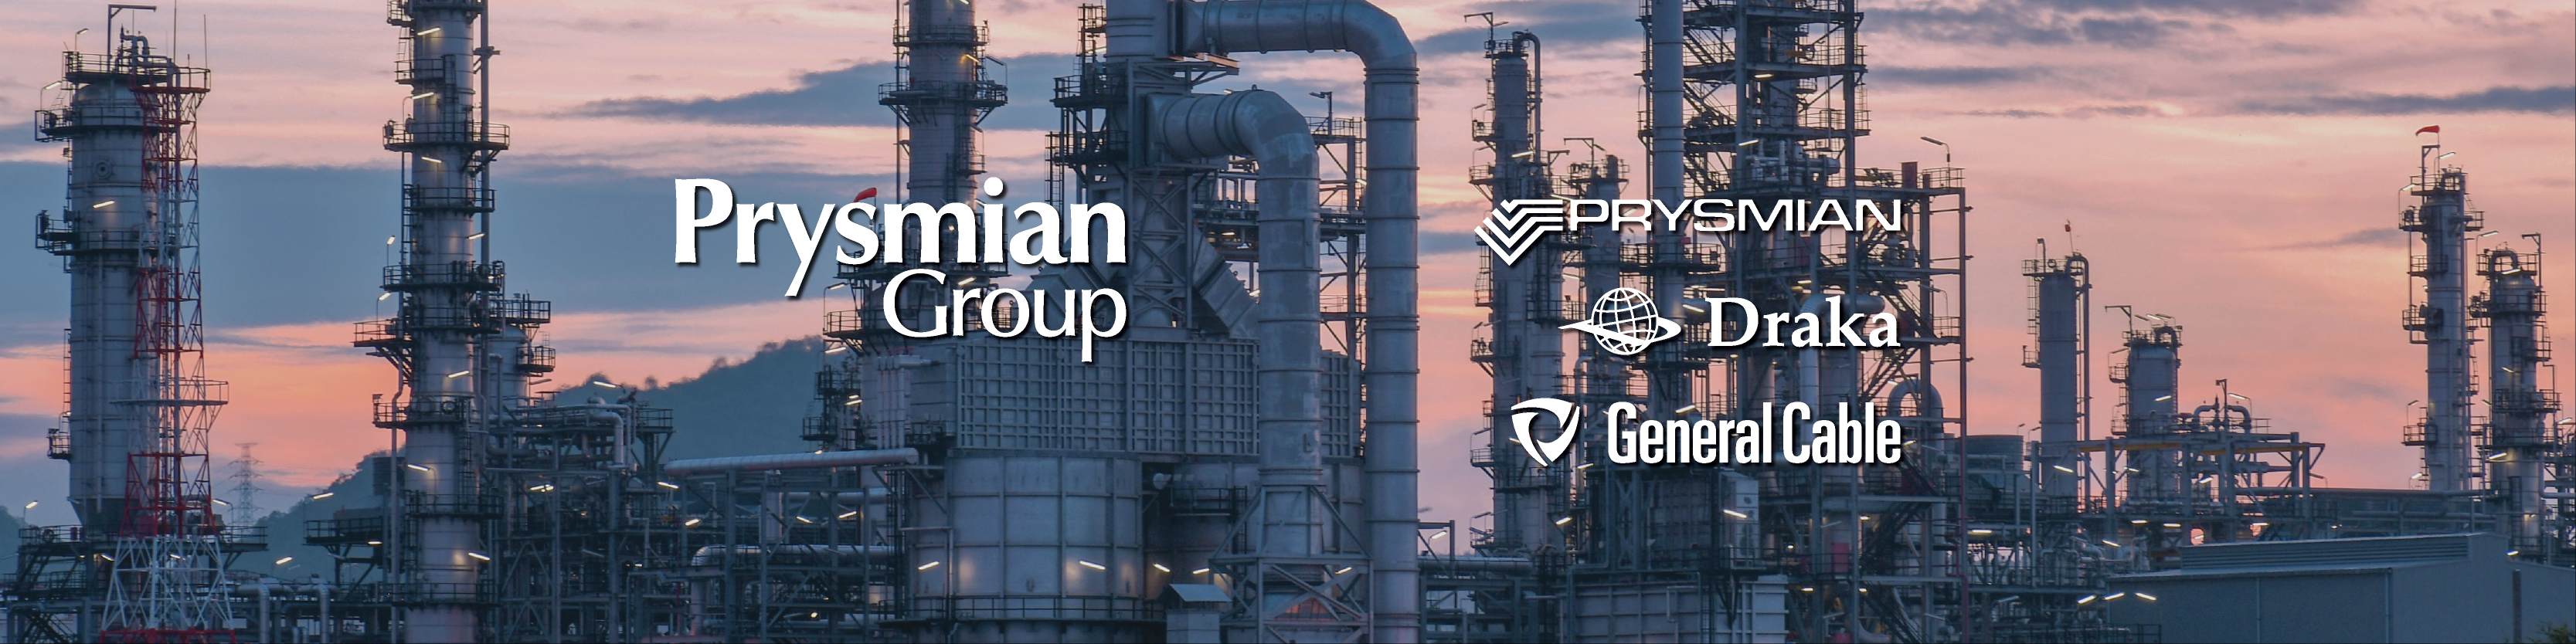 Featured Suppliers Banner Image - Prysmian Group